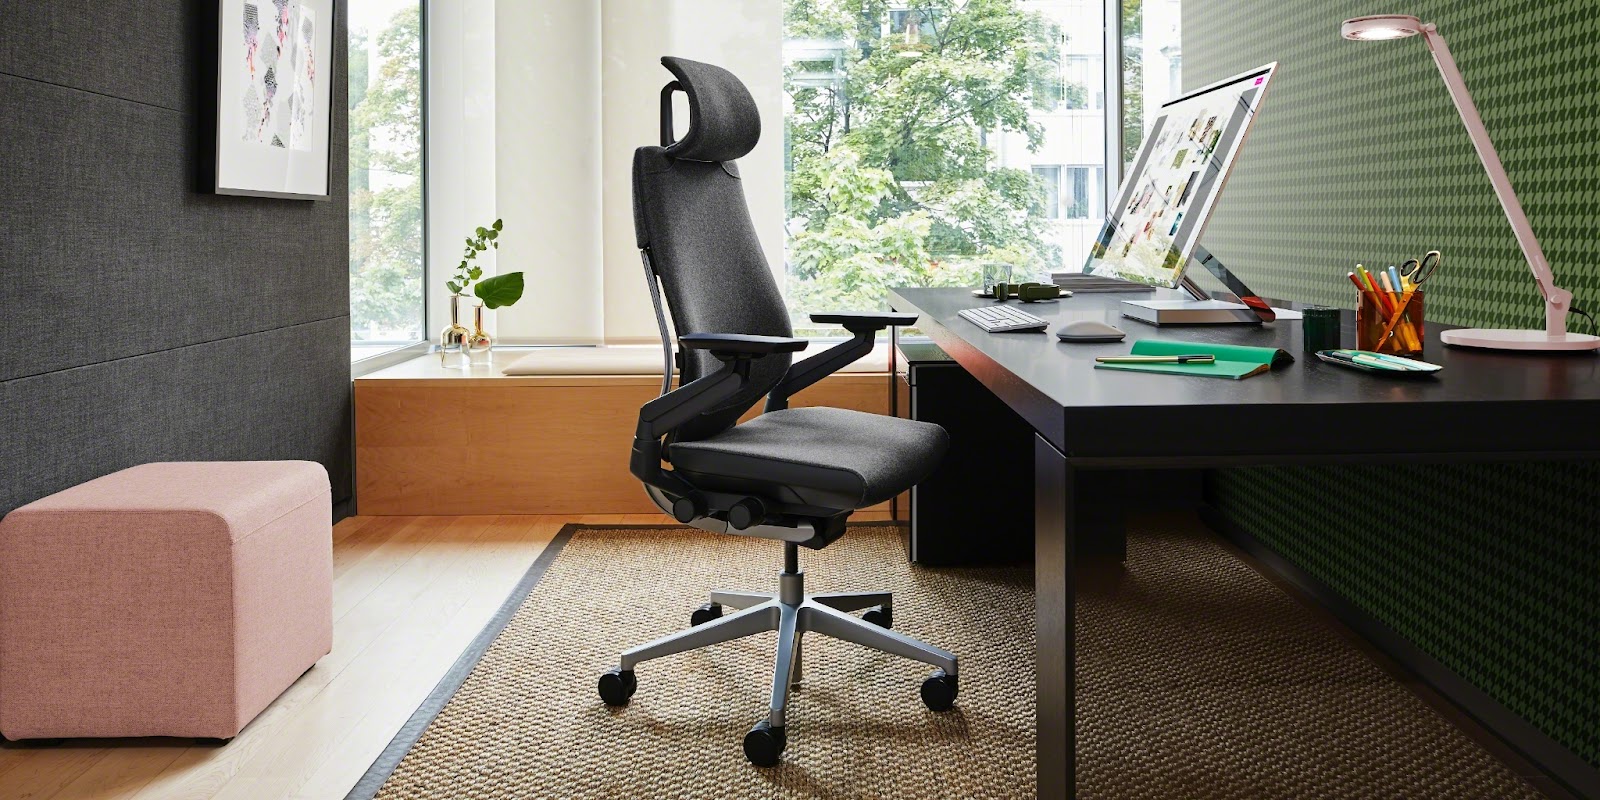 steelcase gesture chair with headrest. dark gray color. placed in front of a desk.